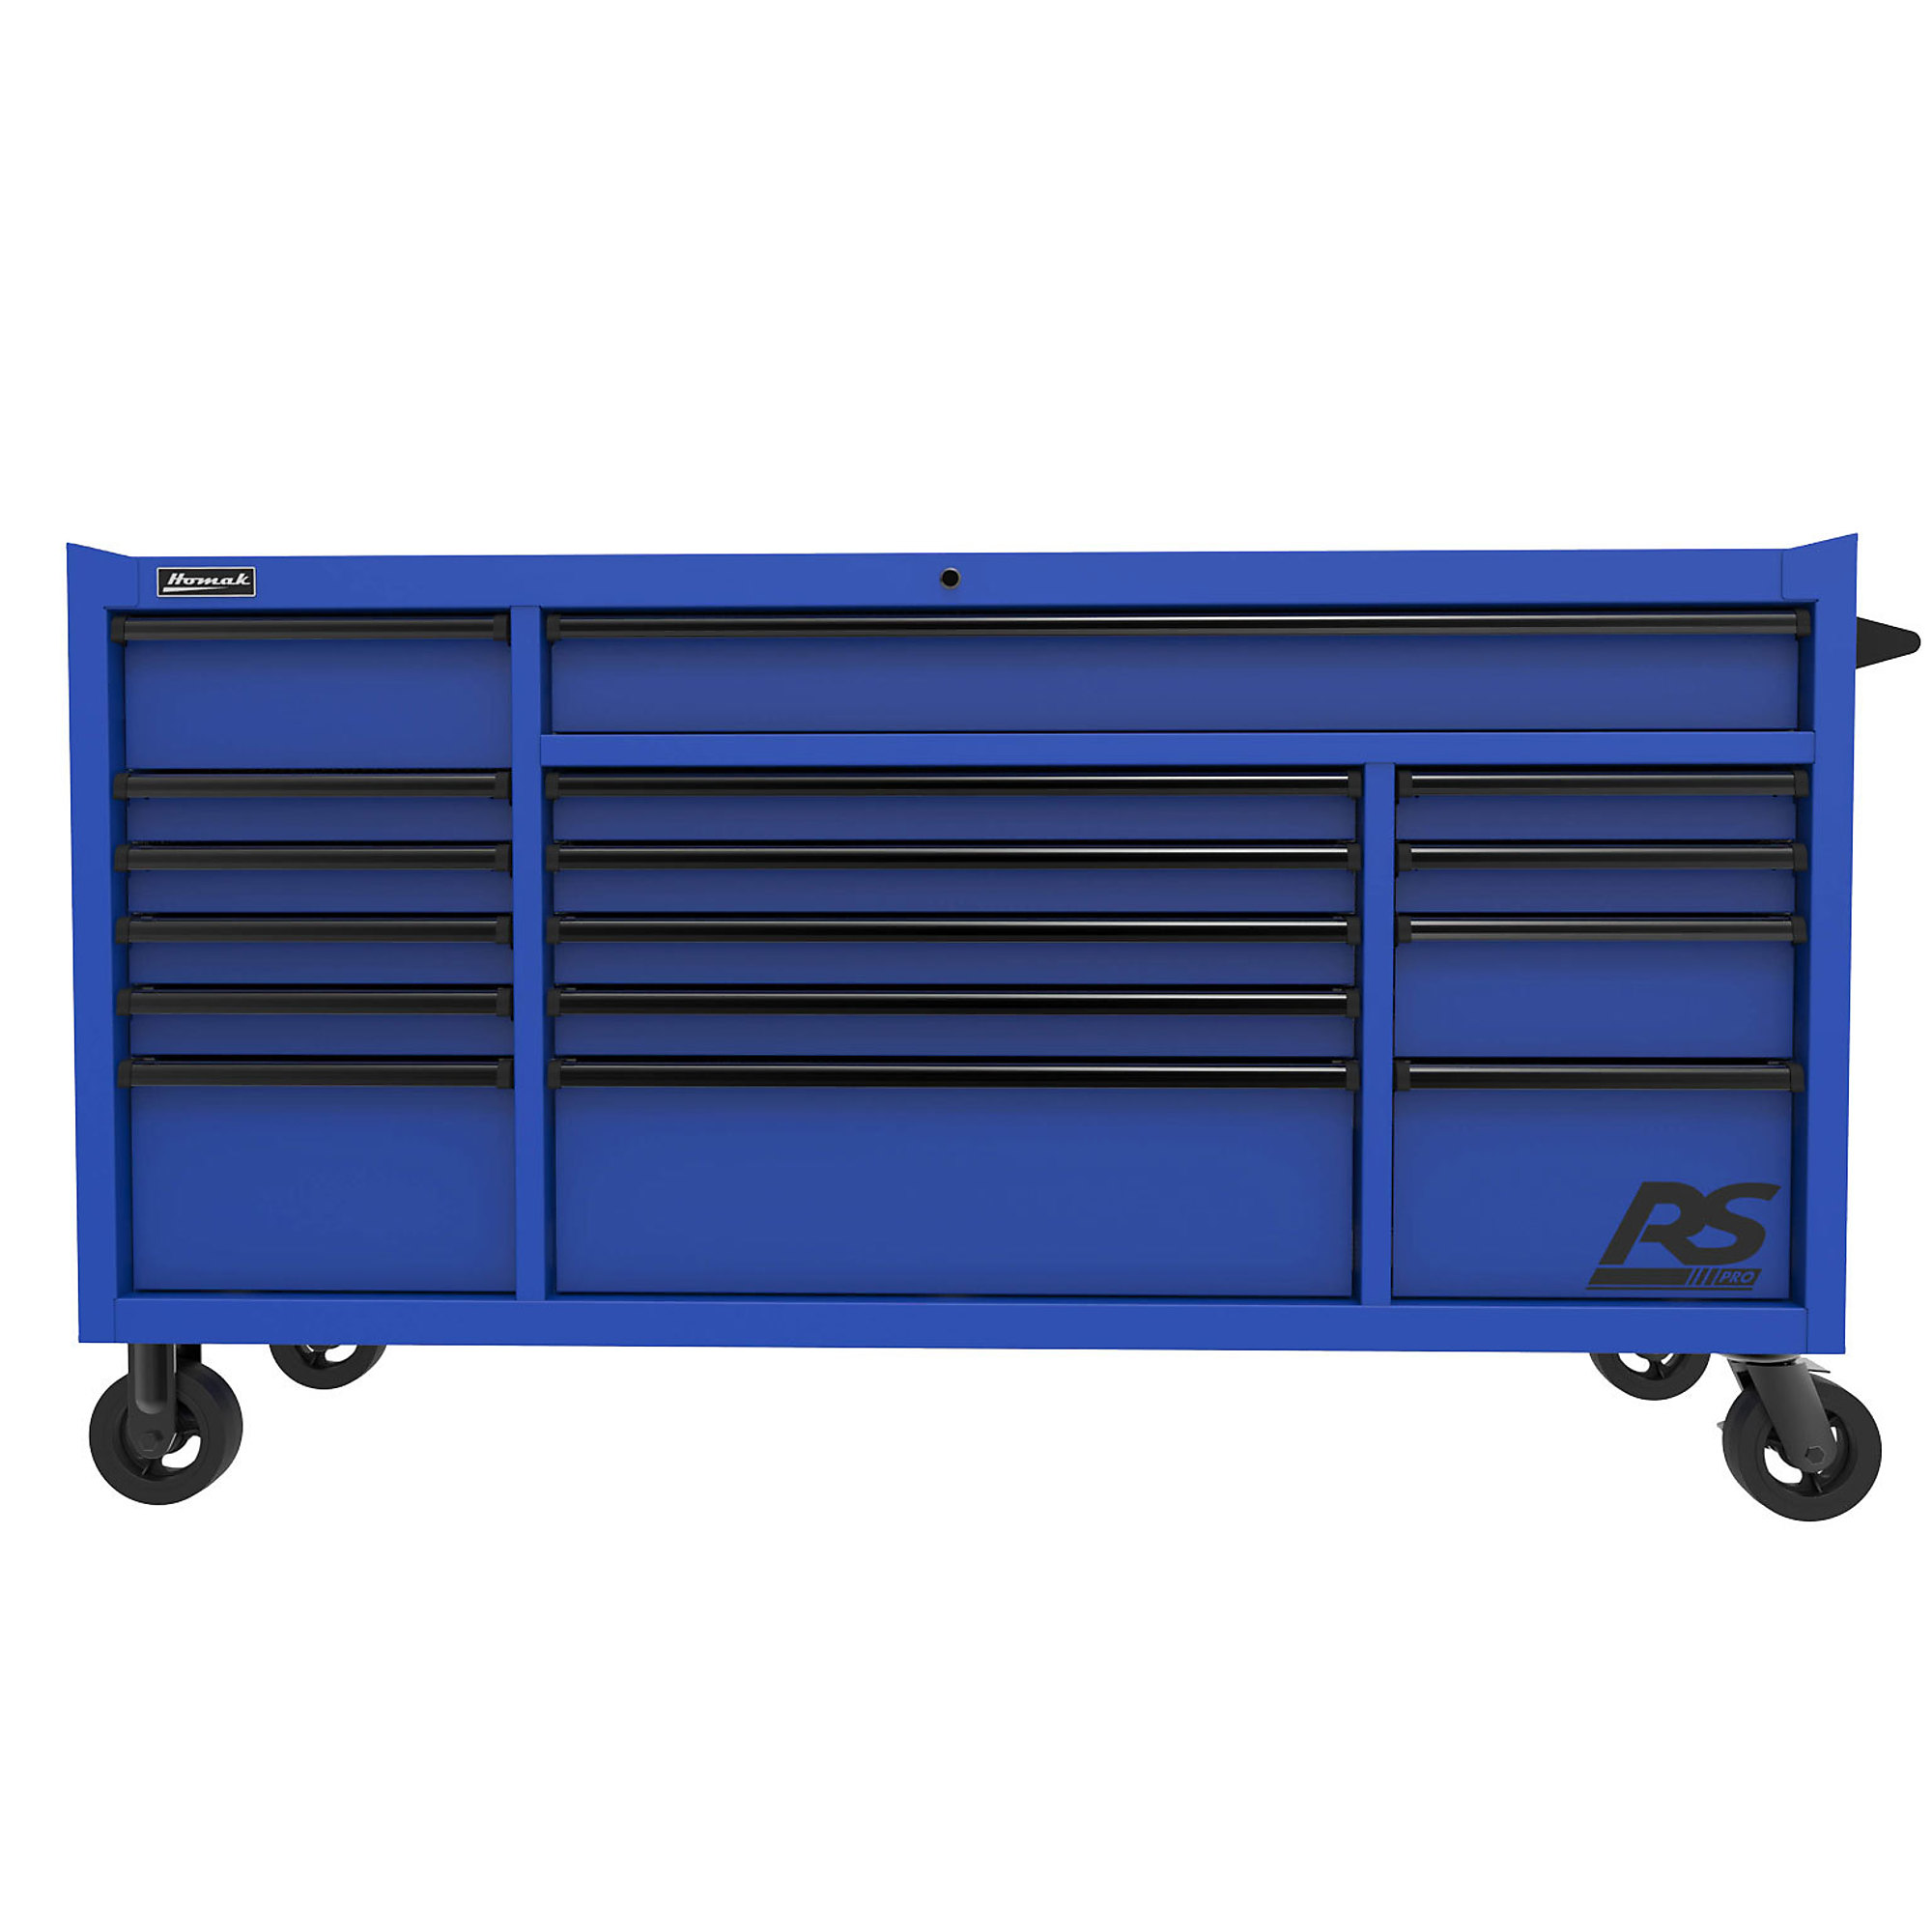 Homak RS Pro, 72Inch RS PRO 16 DWR ROLLER CABINET-BLUE, Width 39 in, Height 72 in, Color Blue, Model BL04072160